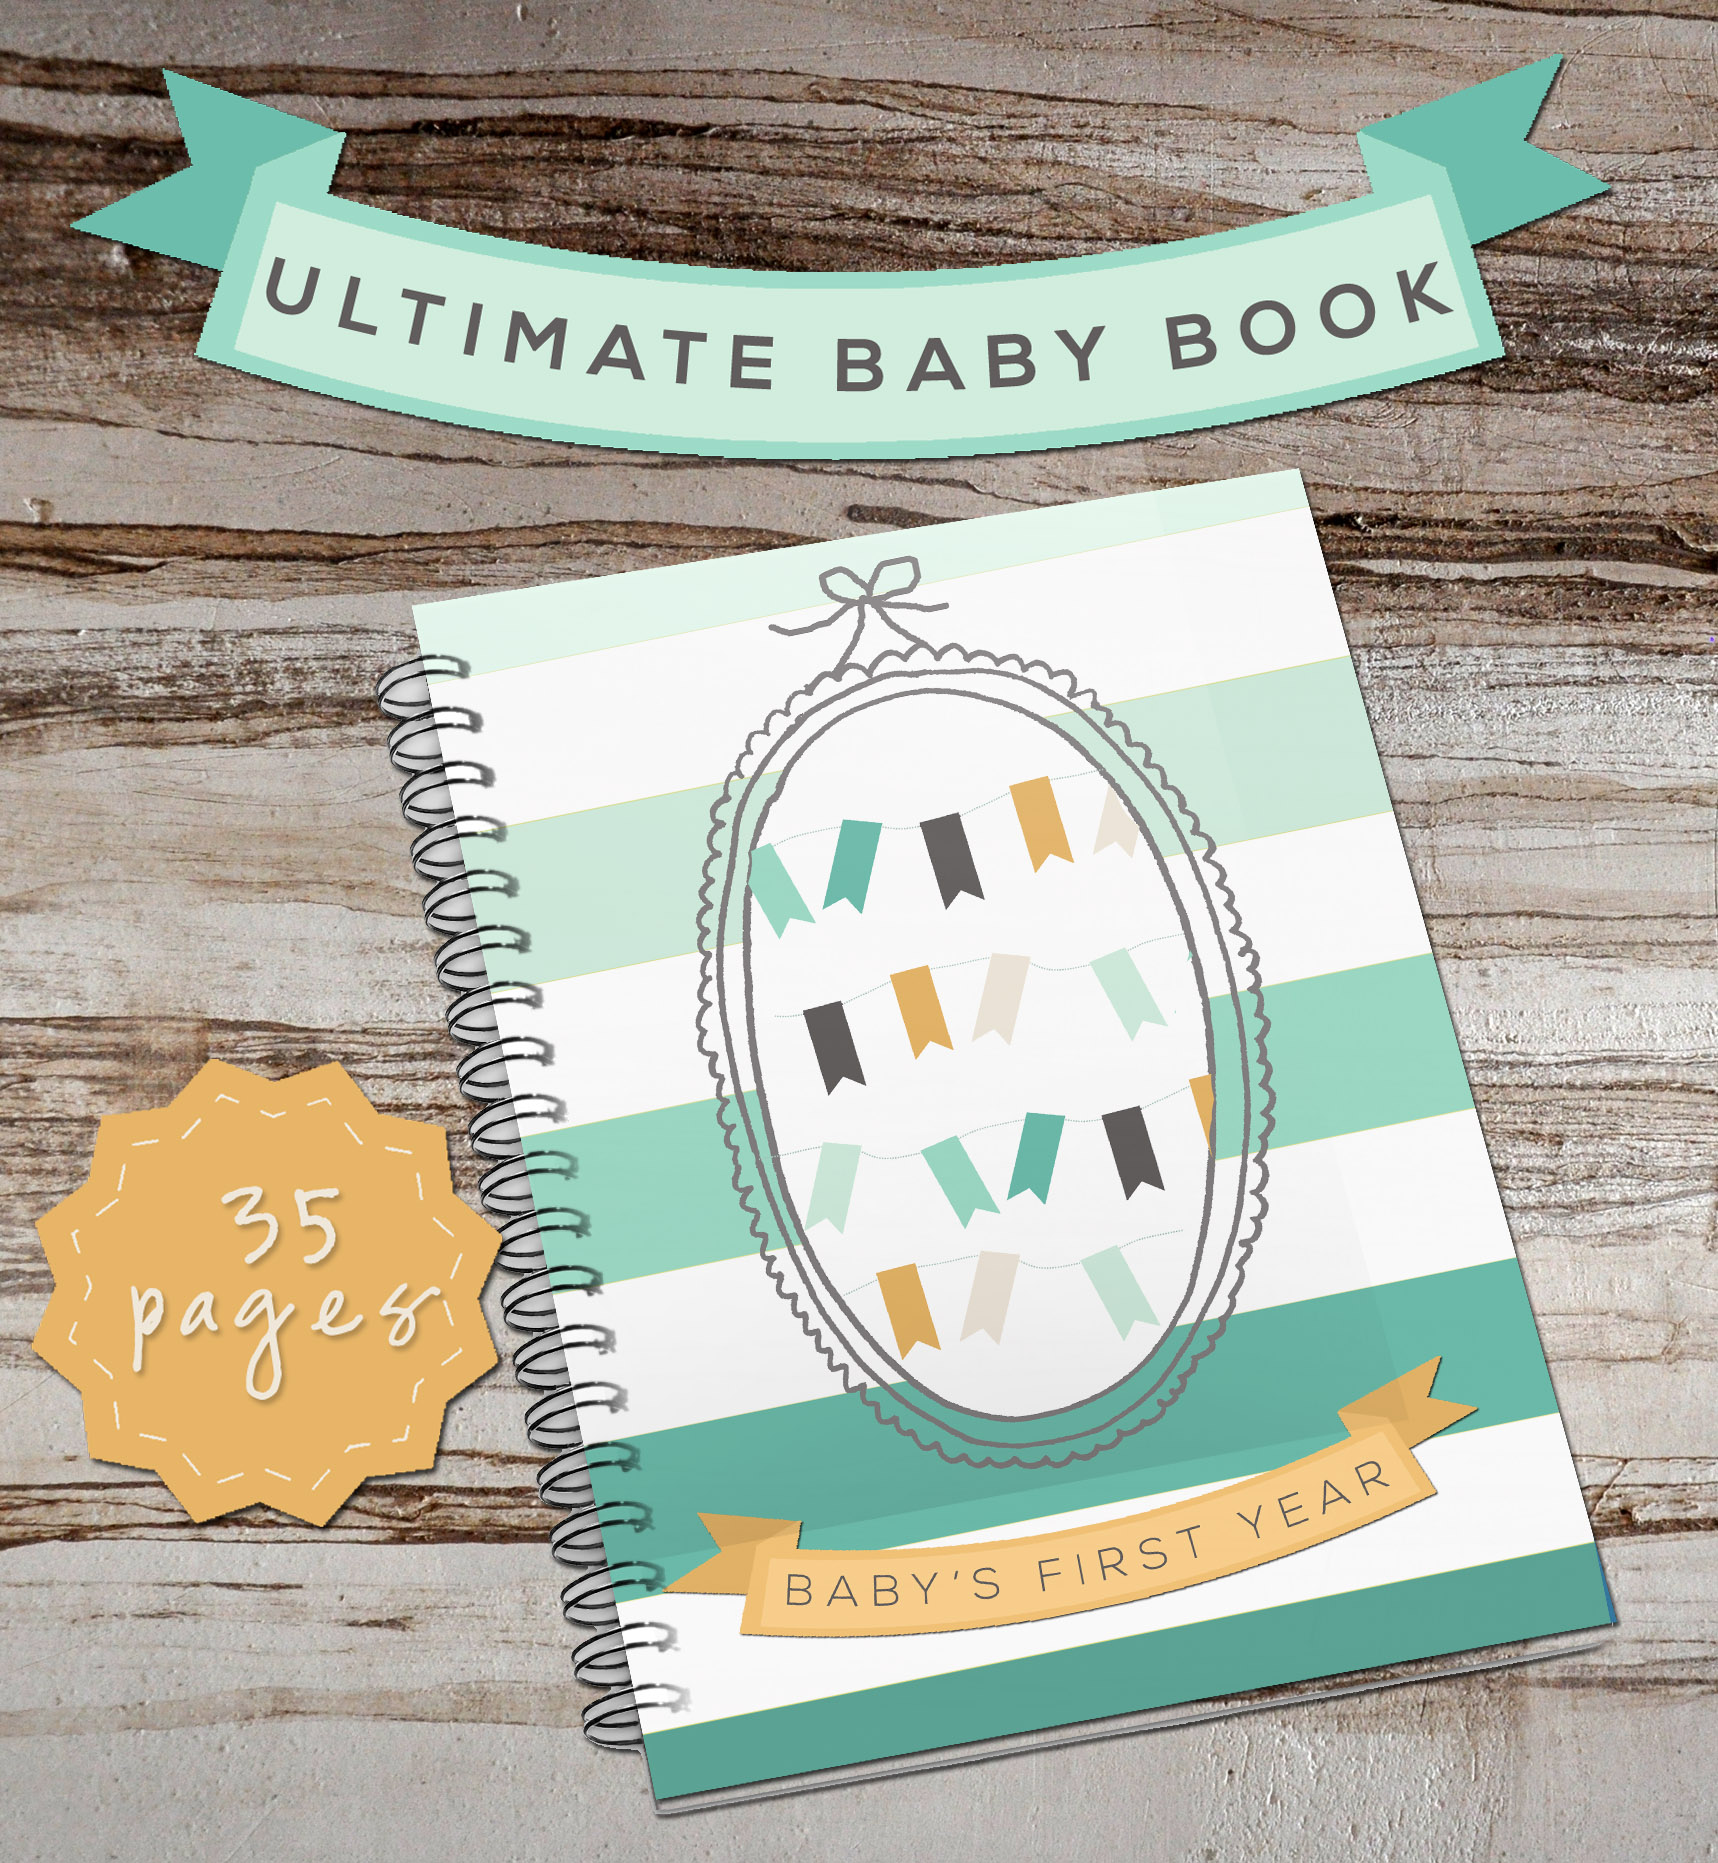 Ultimate Baby Book